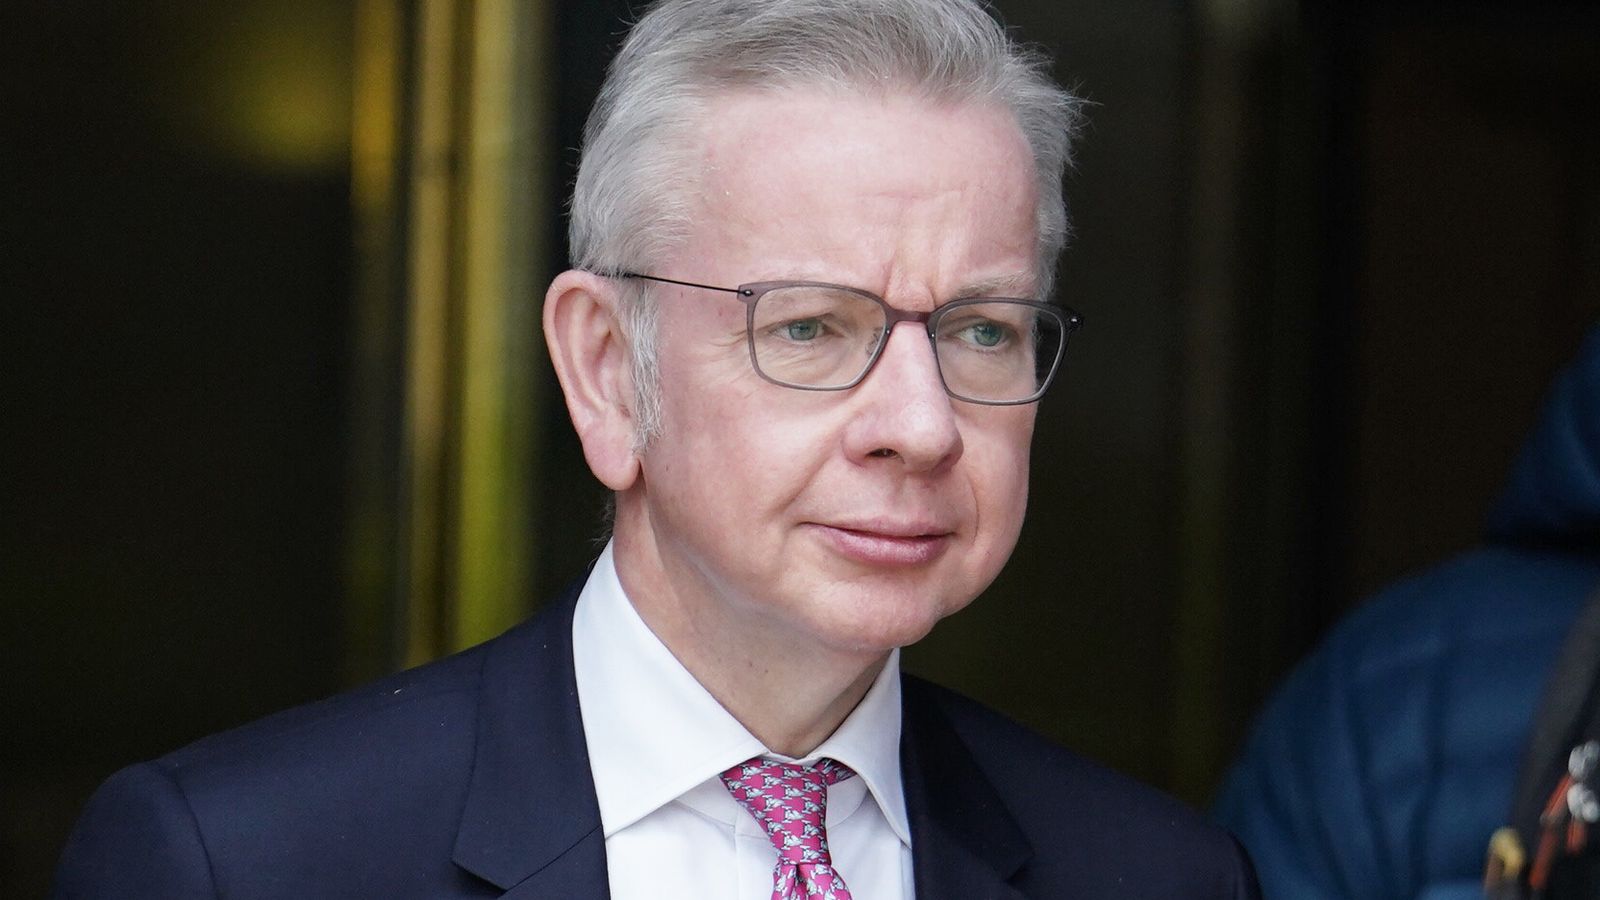 Housing Secretary Michael Gove will not stand at general election